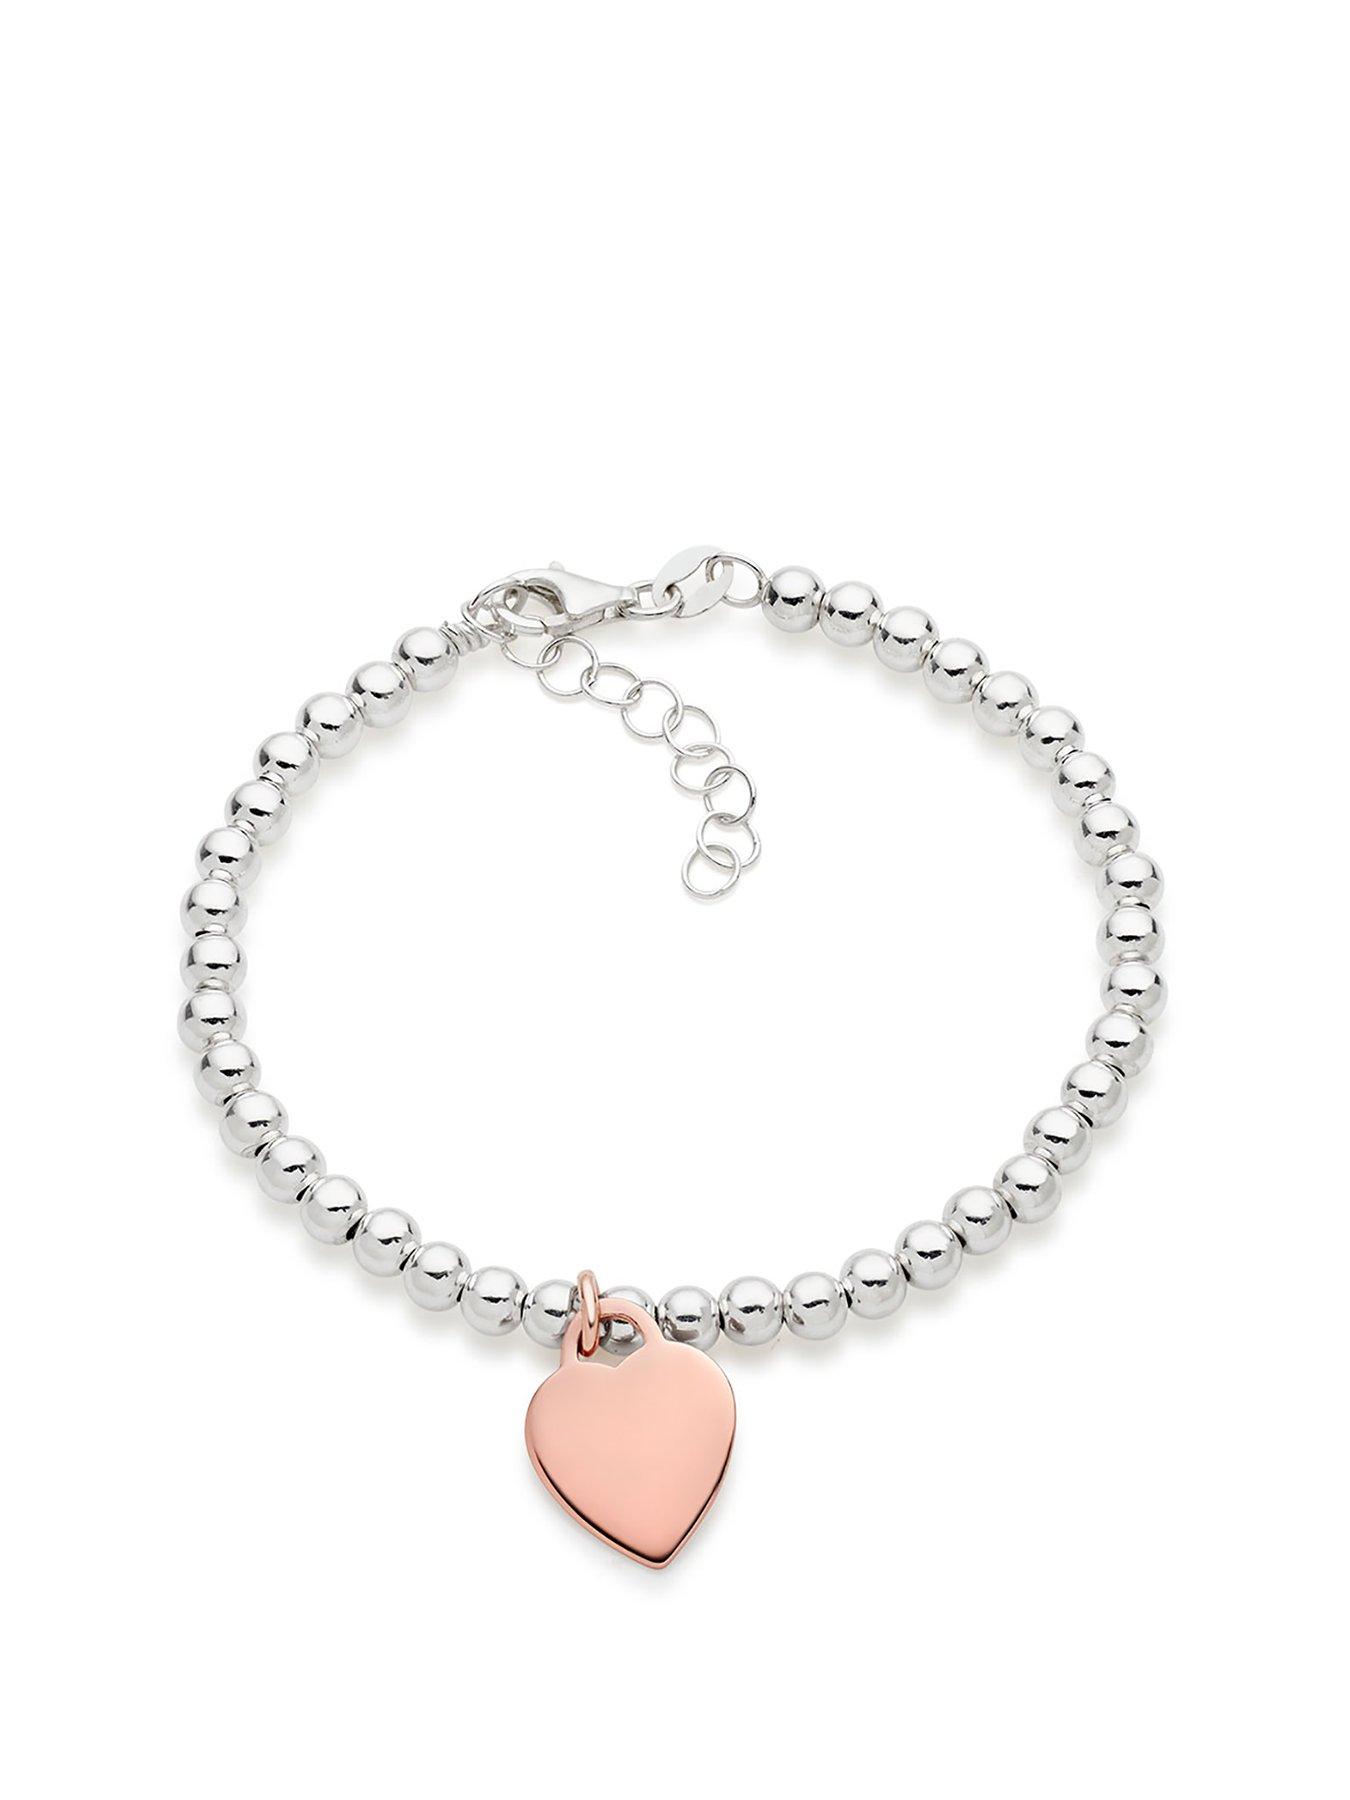  Silver and Rose Gold Plated Heart Ball Bracelet